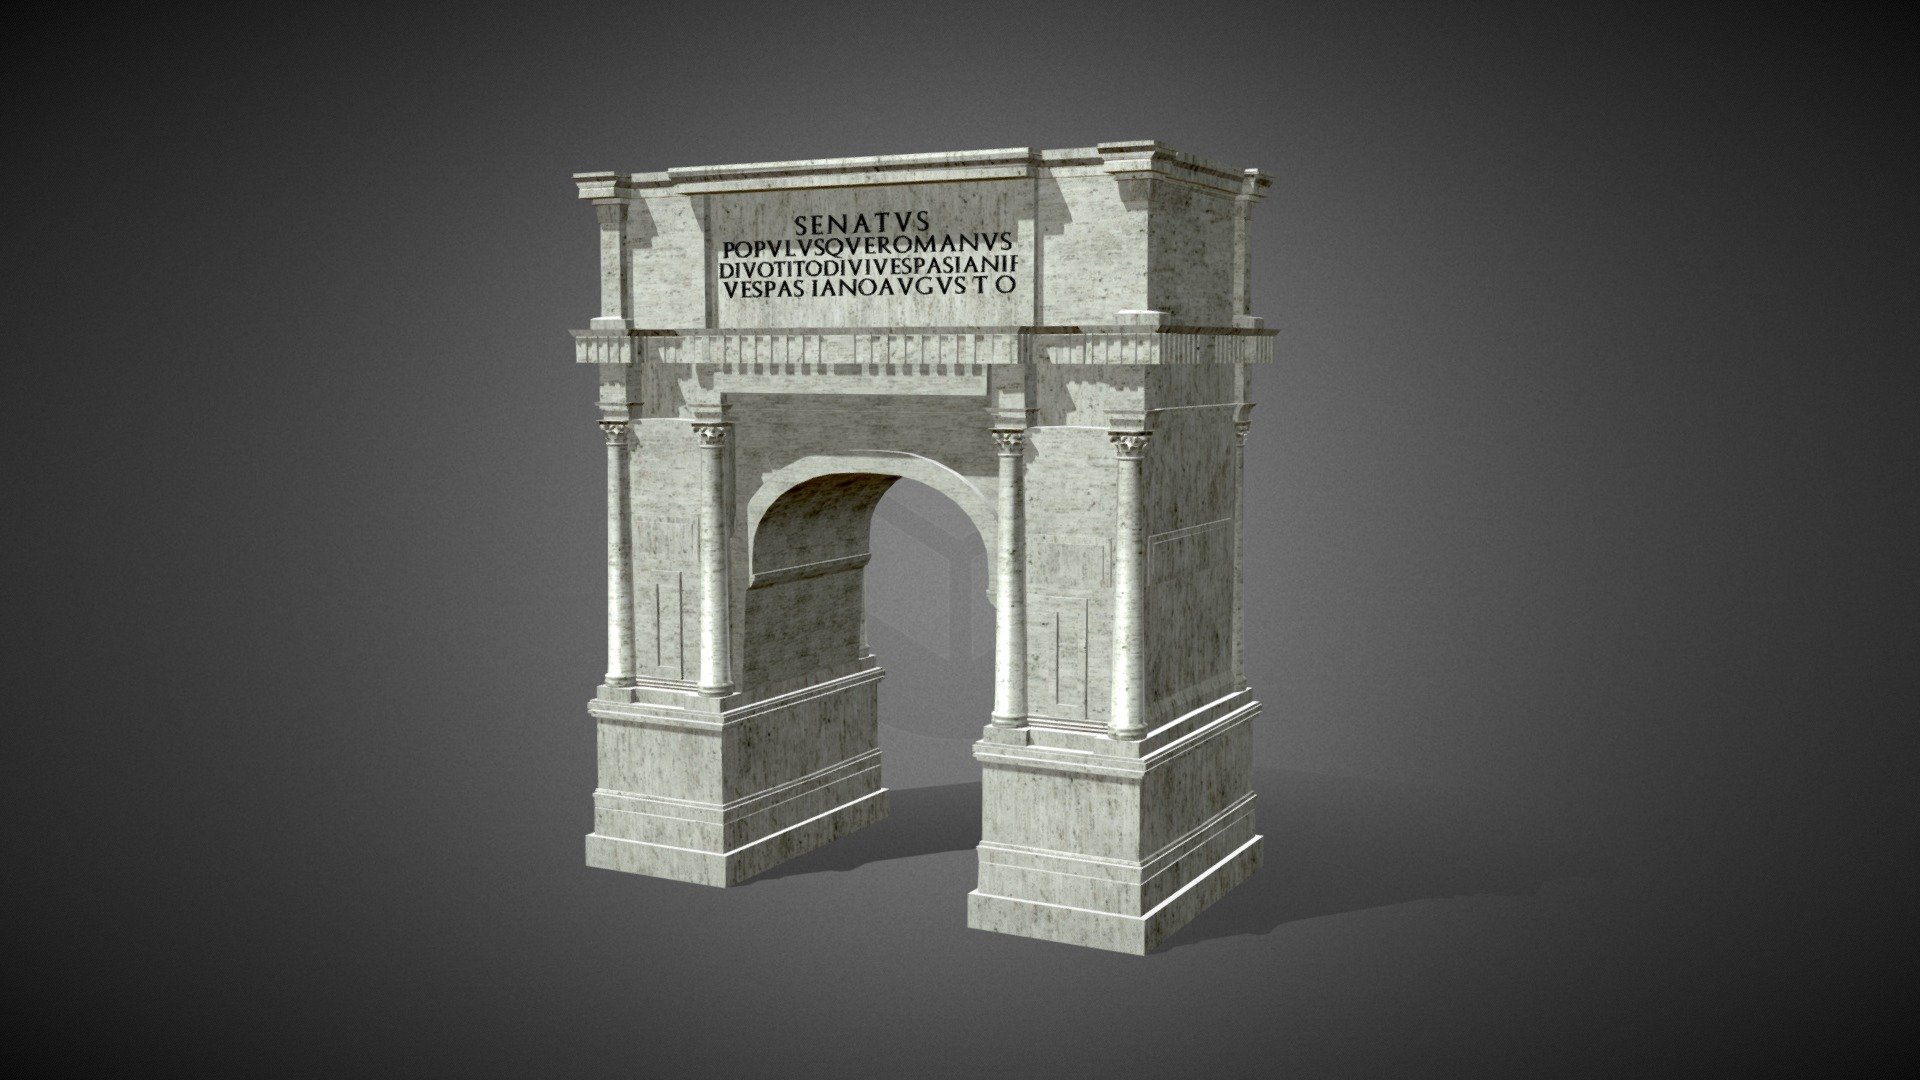 The Arch of Titus is part of a series of 3D models of monuments of ancient Rome (Palatino, Stadium of Domitian, Temple of Vespasian, Temple of Jupiter at the Campidoglio, Iseo Campense, Terme di Nerone, Equestrian statue of Domitian, Meta Sudans, Palatine Hill, Foro di Nerva) that I created for a game app connected to the &ldquo;Domitian